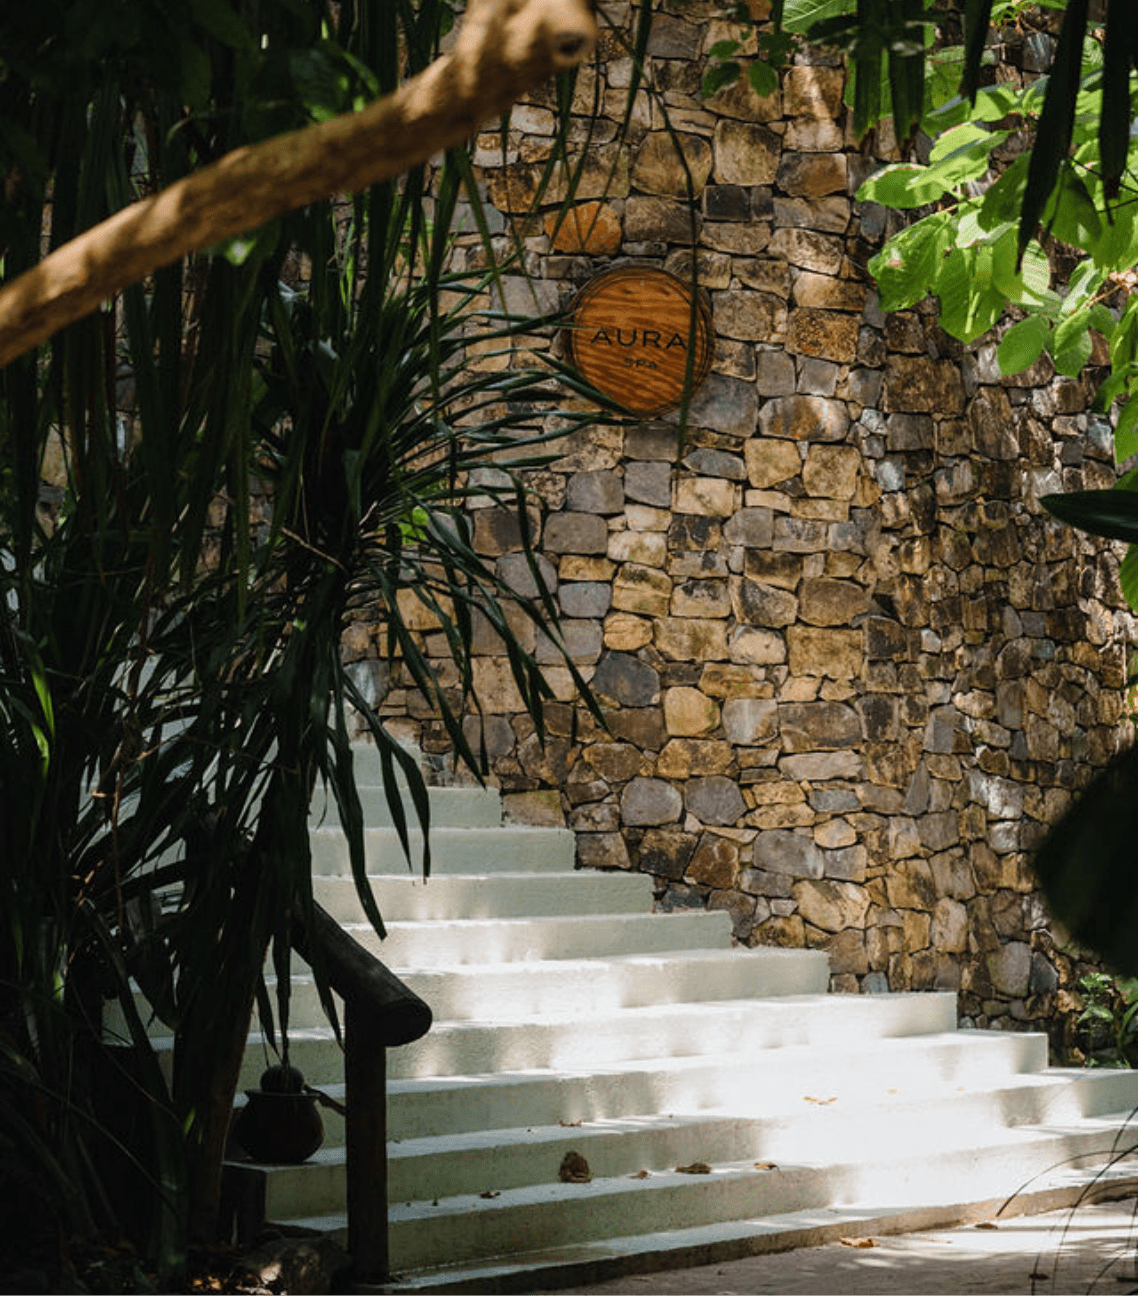 Aura Spa stairs with wooden aura sign